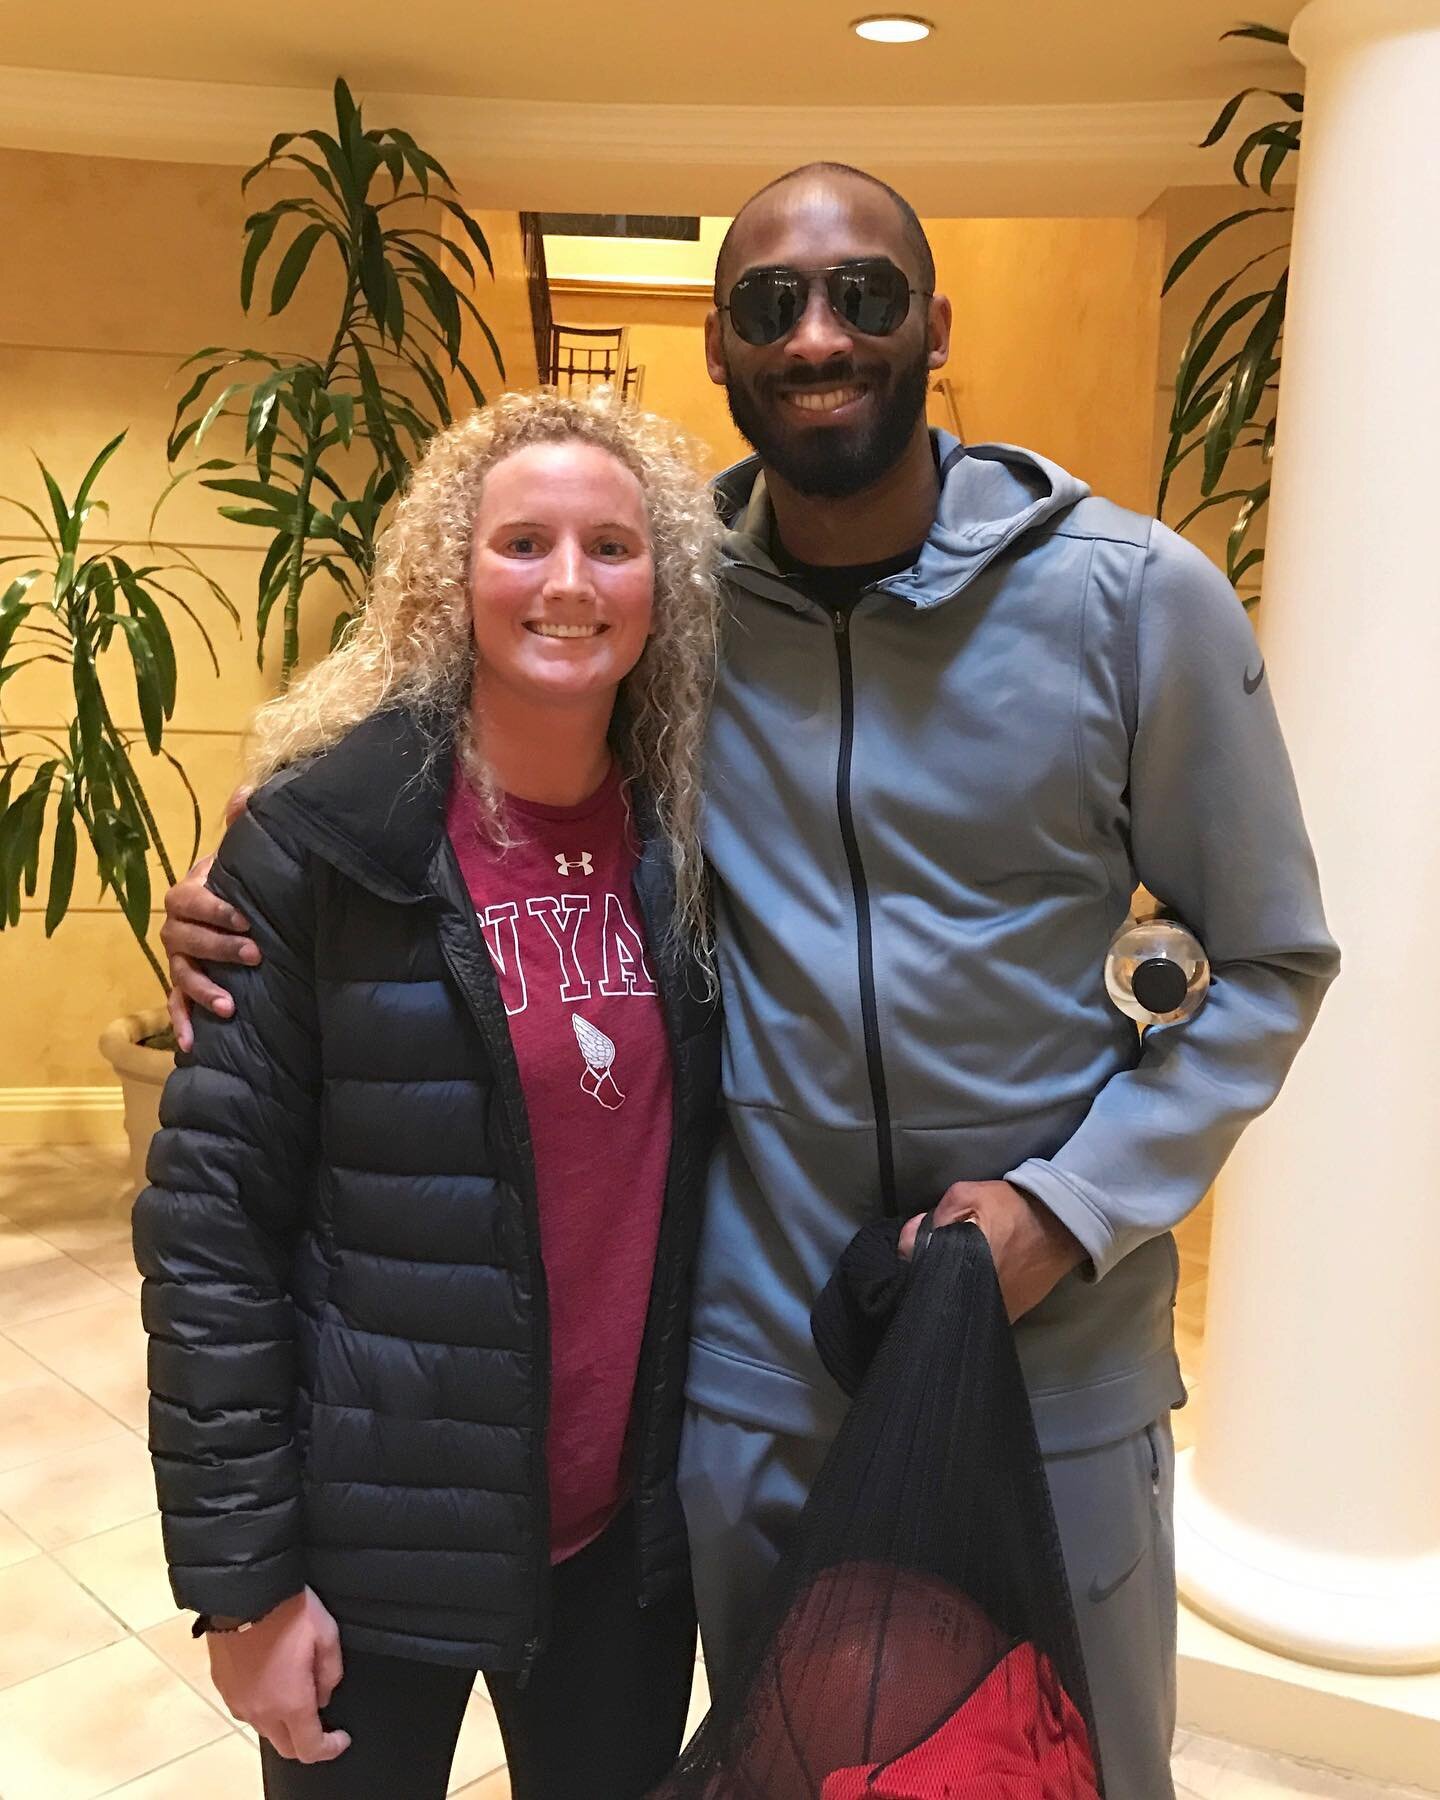 My #KobeStory for today is about the first time I met him in January 2017 at @balboabayresort. I was working out while he was coaching his daughter&rsquo;s basketball team. I strategically finished my workout early and sat at the bottom of the stairs